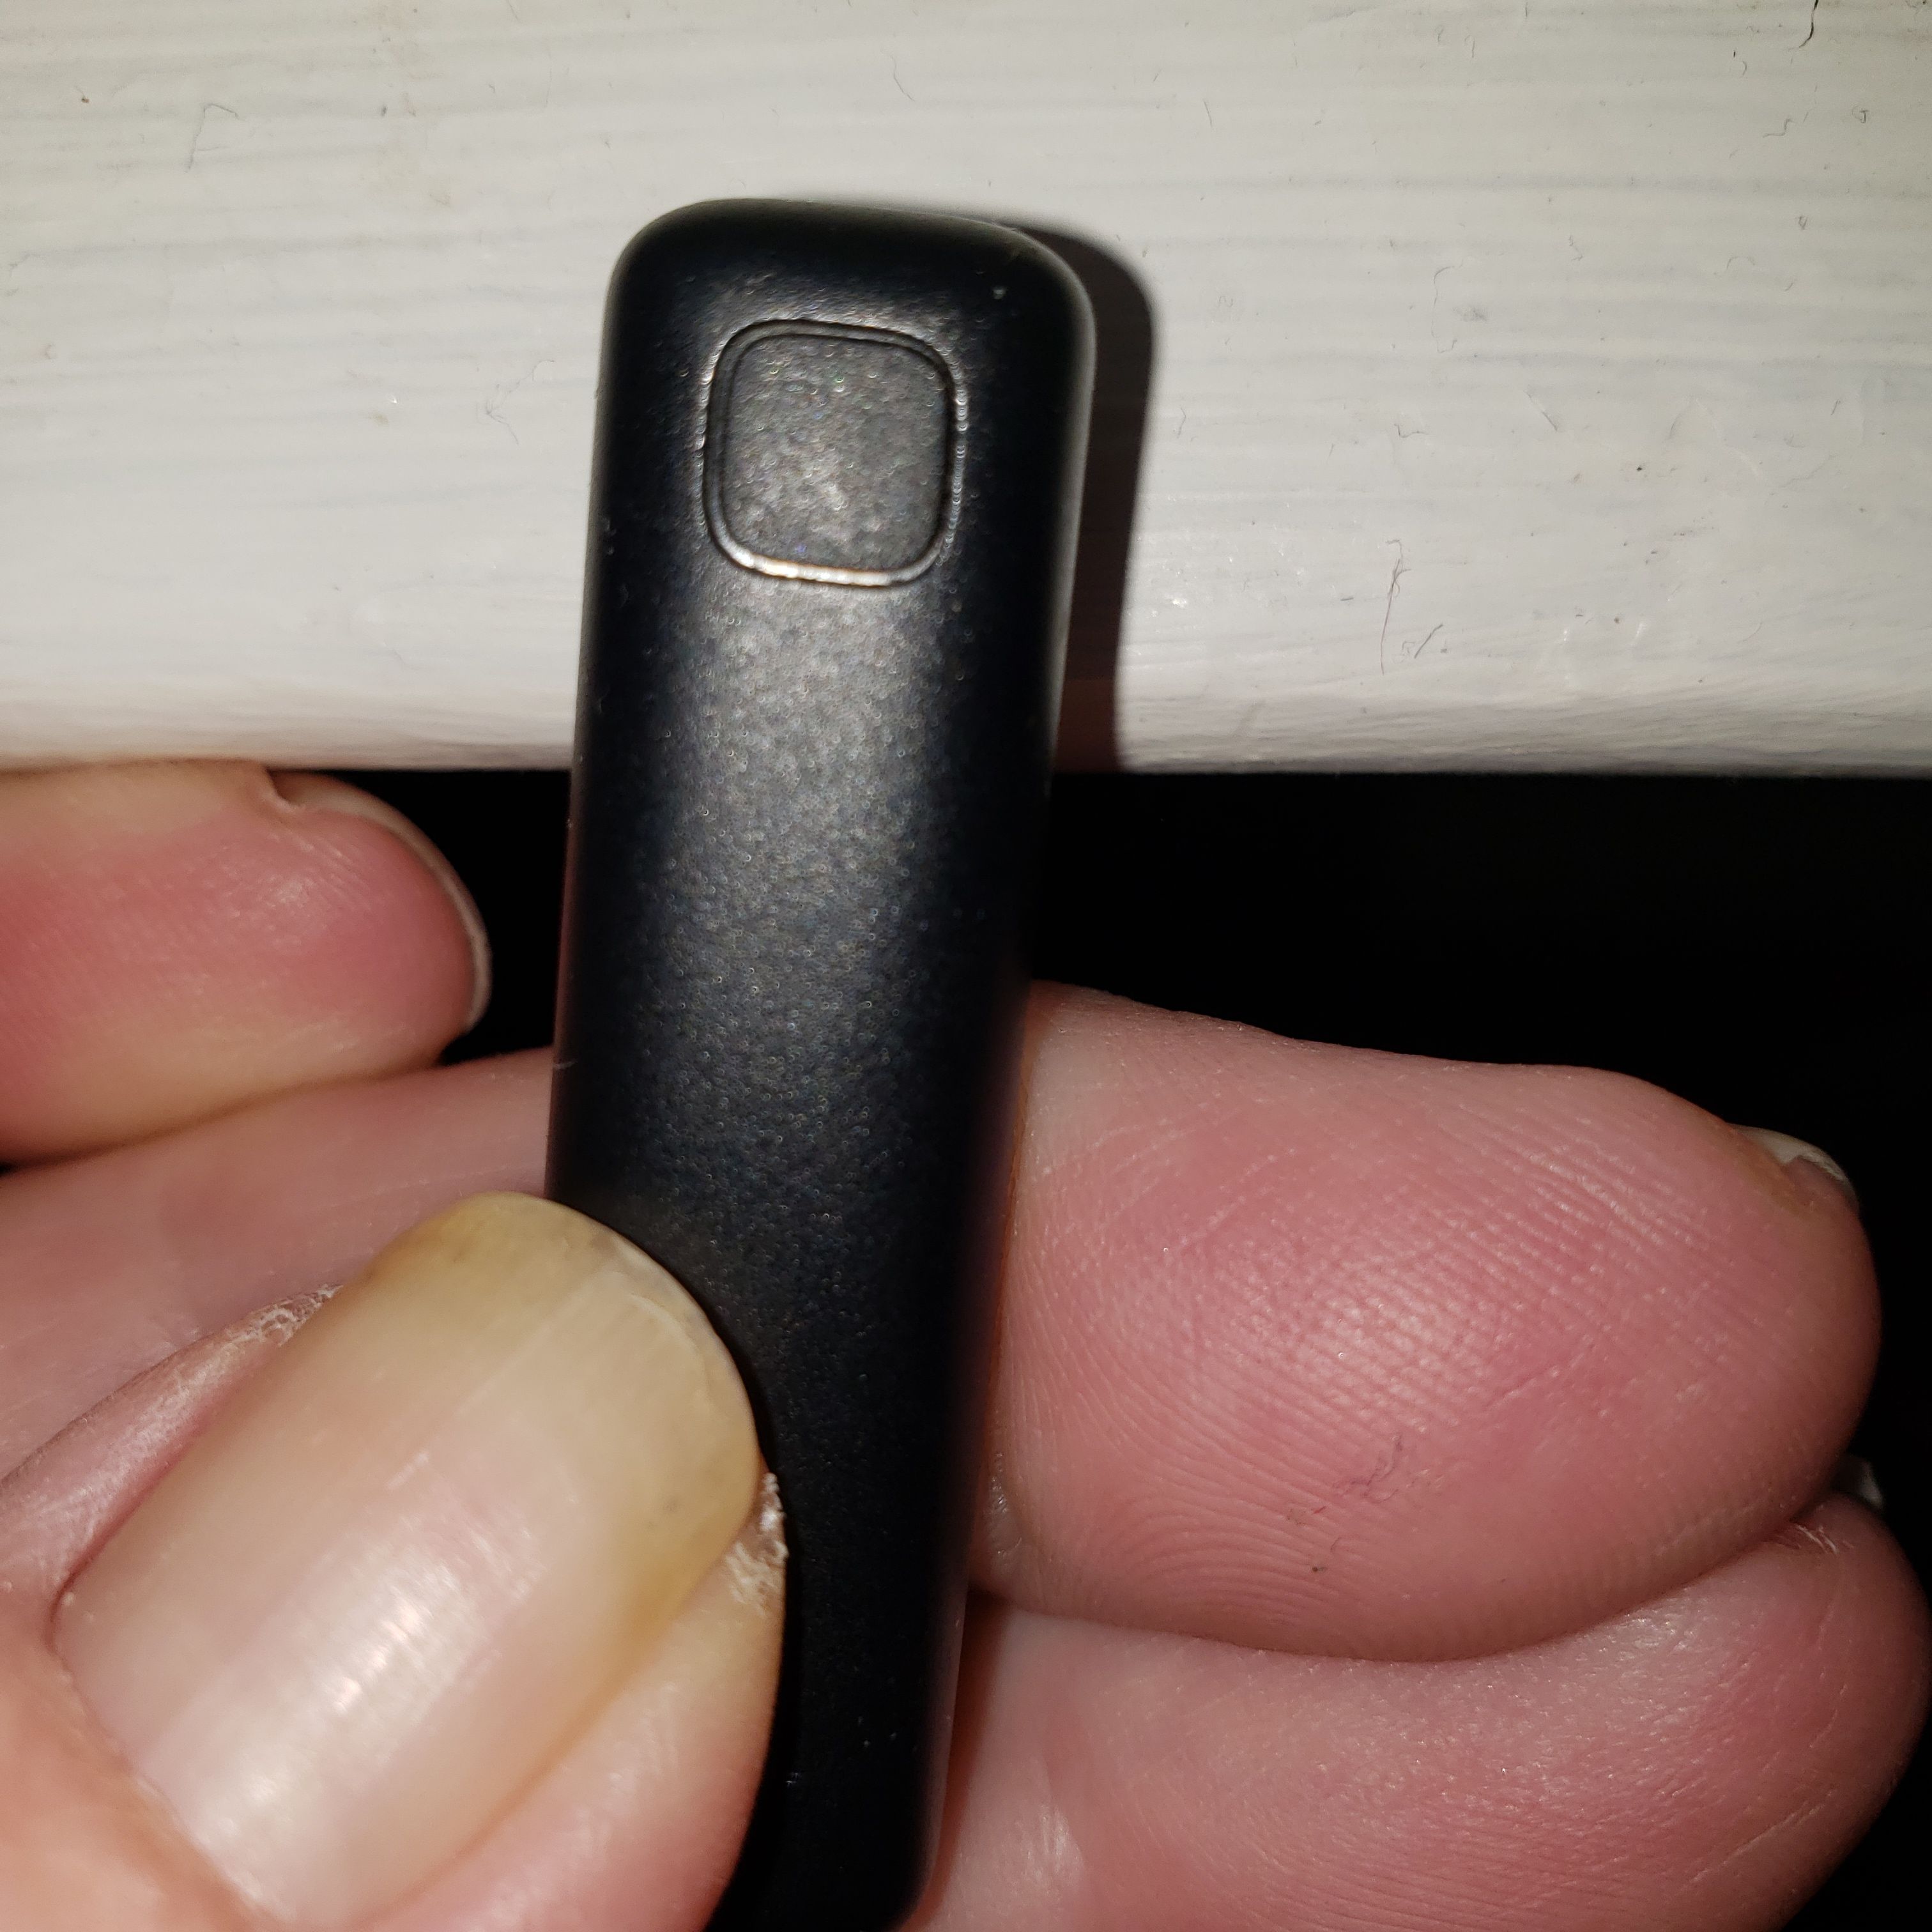 Solved: Fitbit Flex synching and won't reset Fitbit